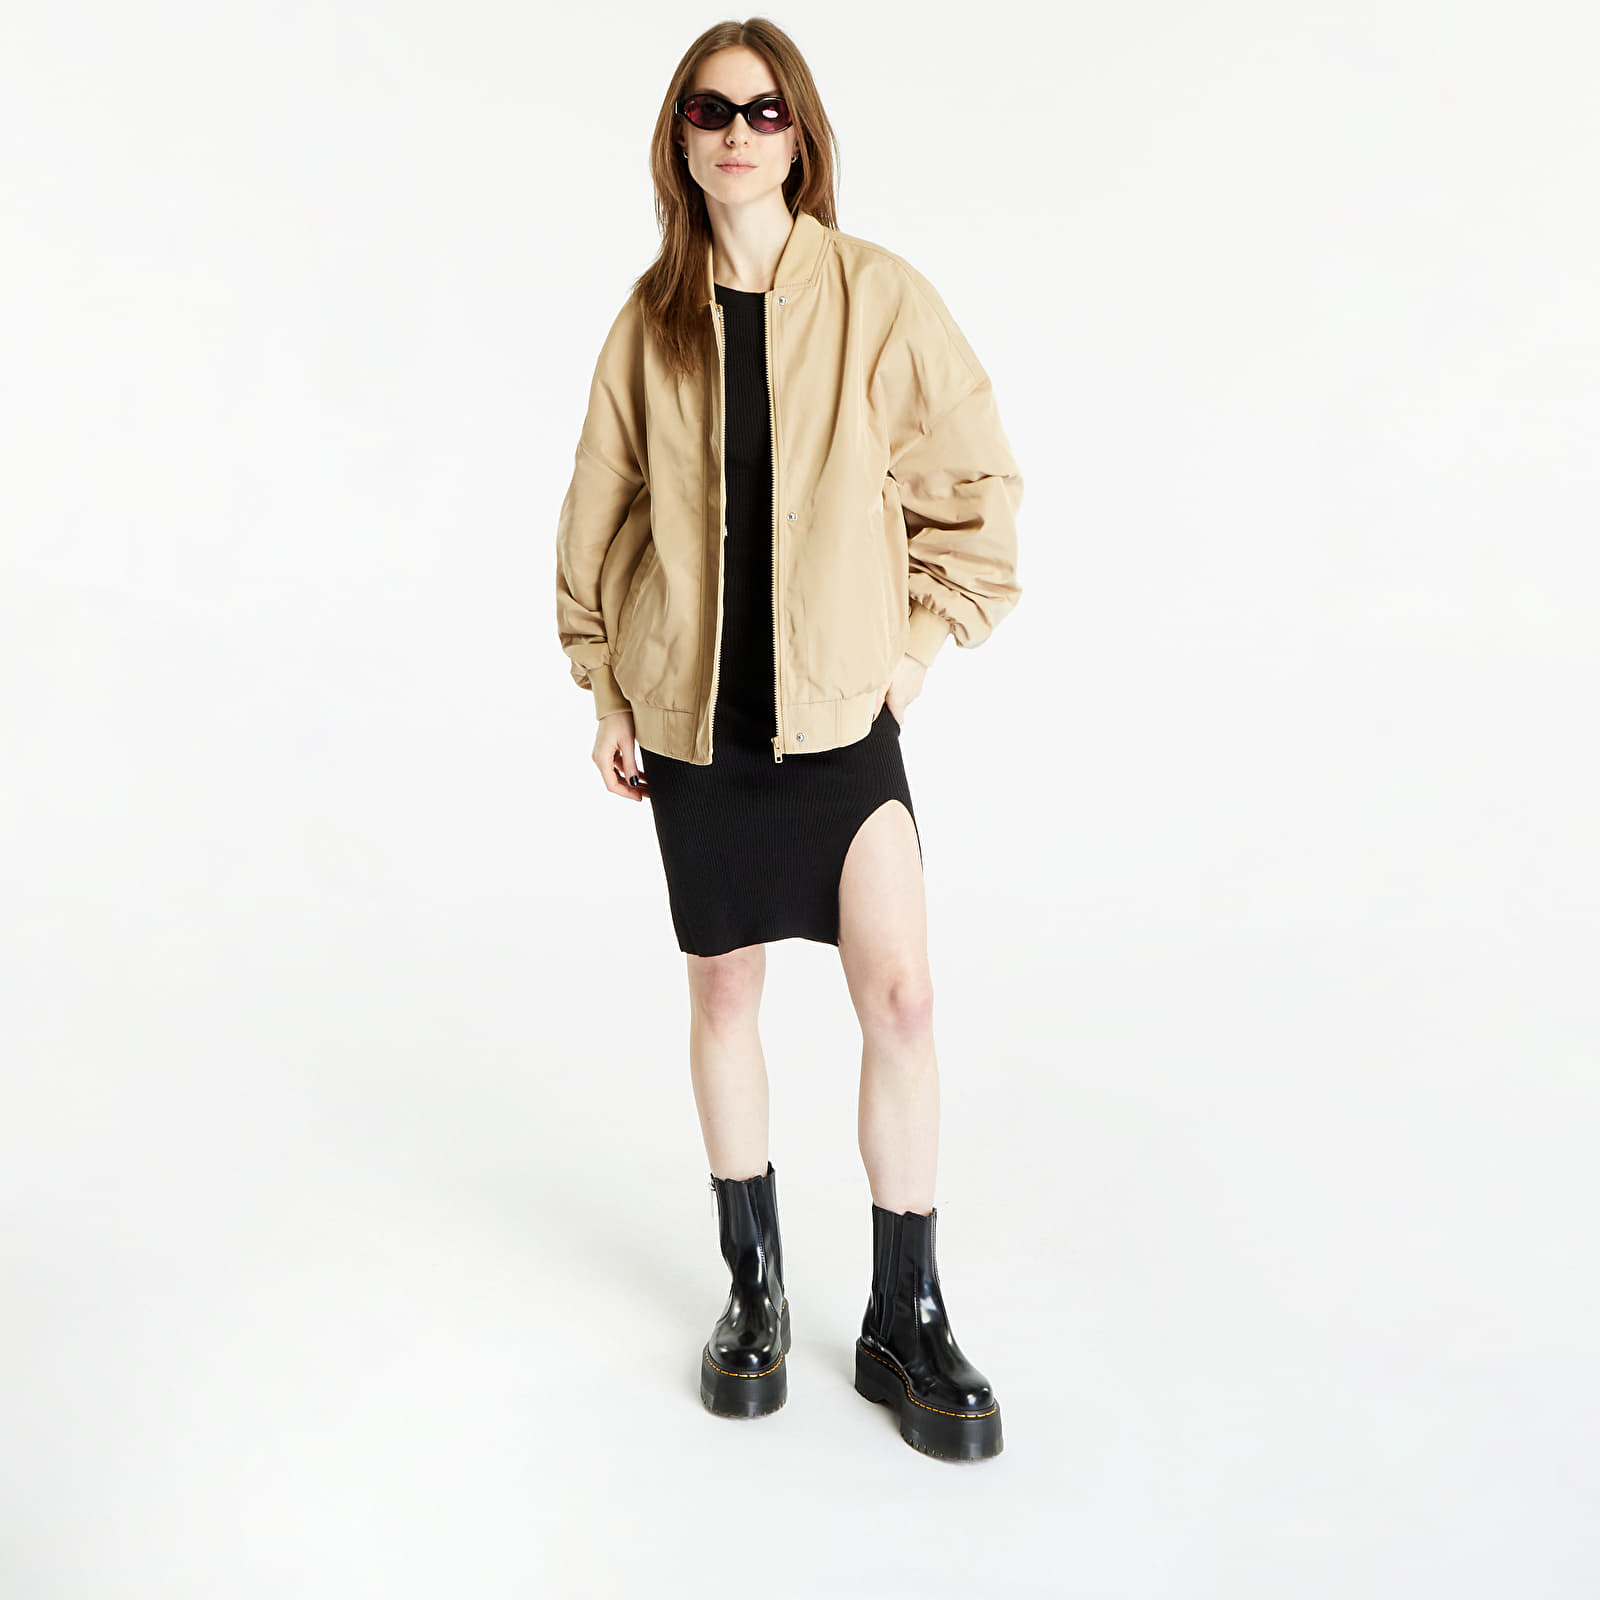 Union Jacket Jackets Urban Light Ladies Queens | Recycled Classics Oversized Beige Bomber